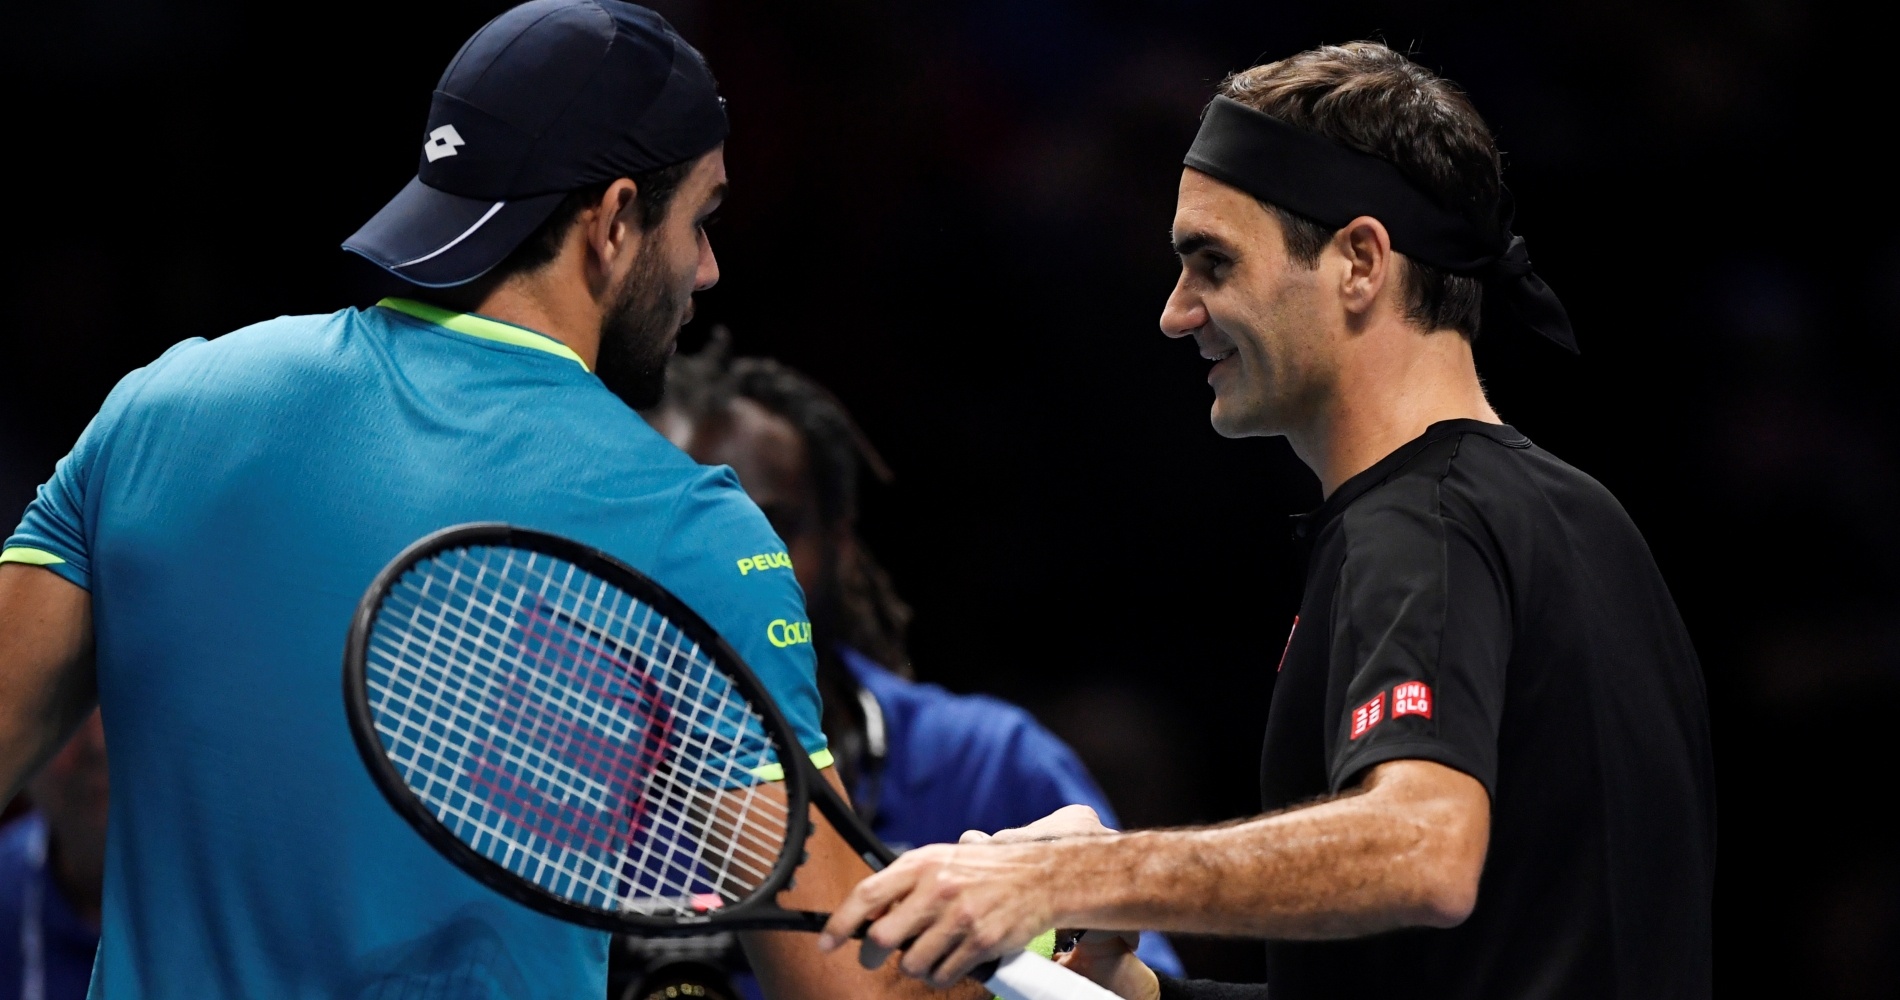 Matteo Berrettini and Roger Federer after their encounter at the 2019 ATP Nitto Finals